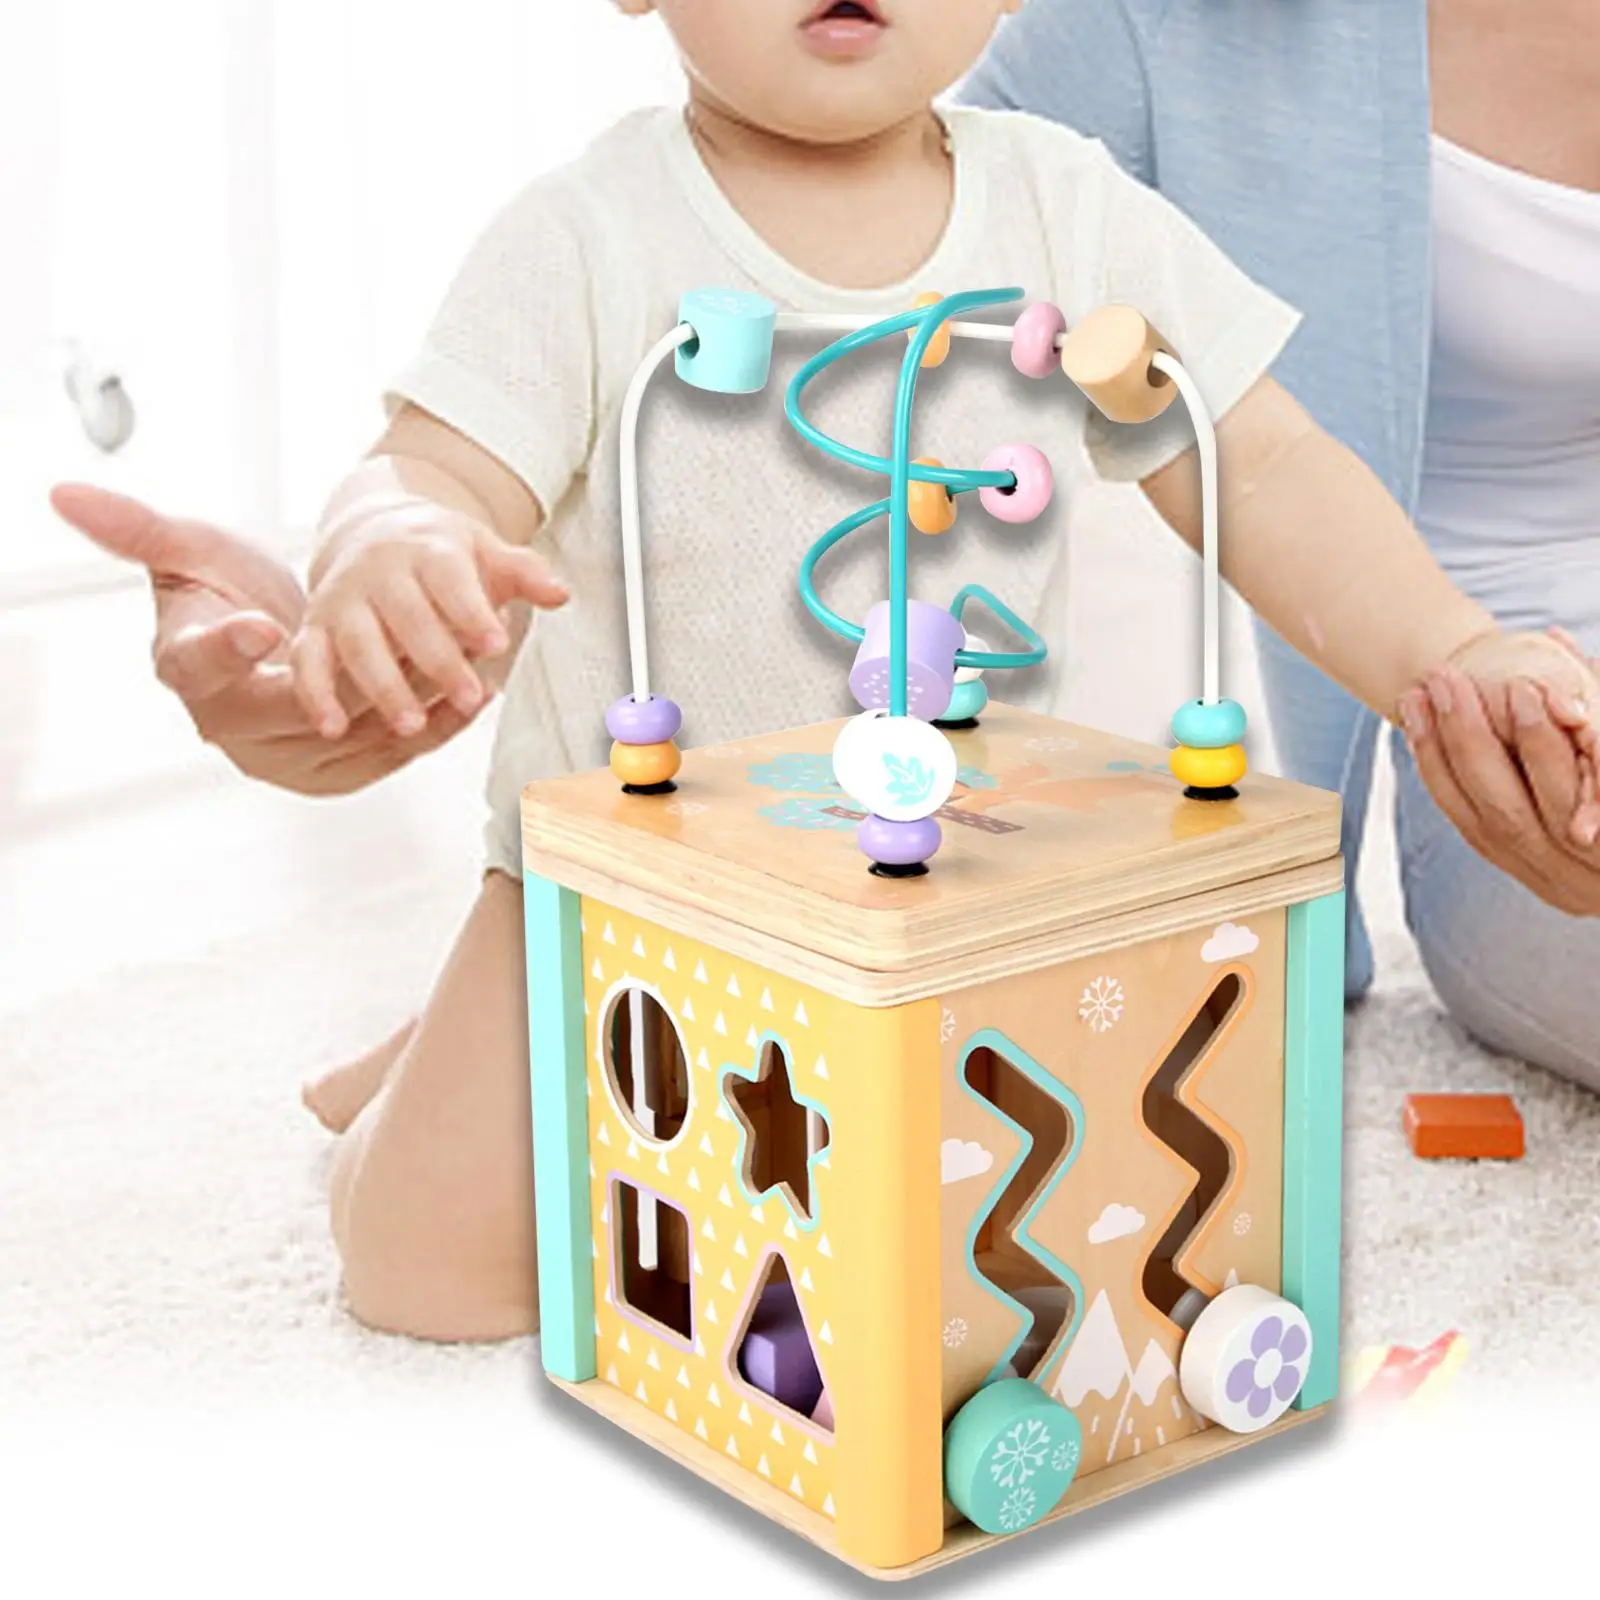 Bead Maze Early Educational Interactive Toy Matching Logical montessori Game Classic Bead Maze for Children Preschool